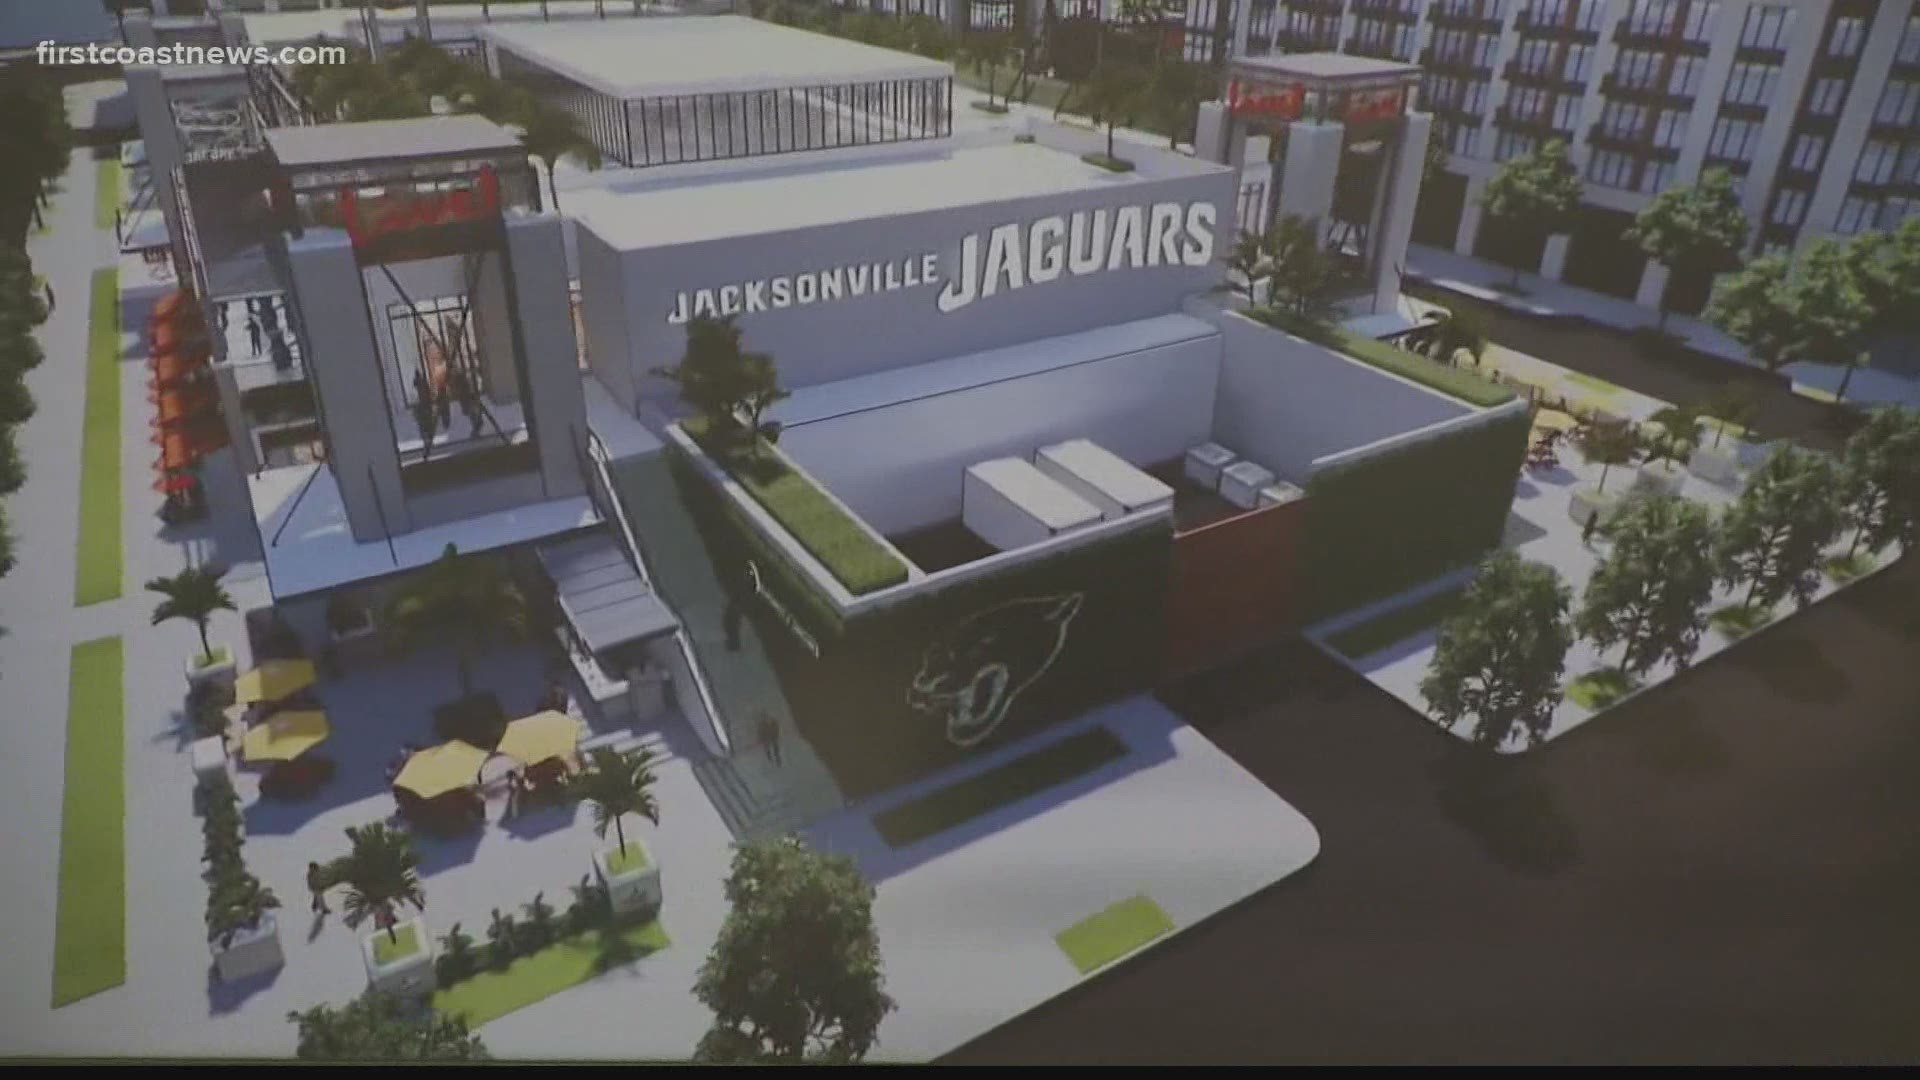 The vote is the culmination of a process that began when the deal between Mayor Lenny Curry's office and Jags owner Shad Khan's team was first presented in October.